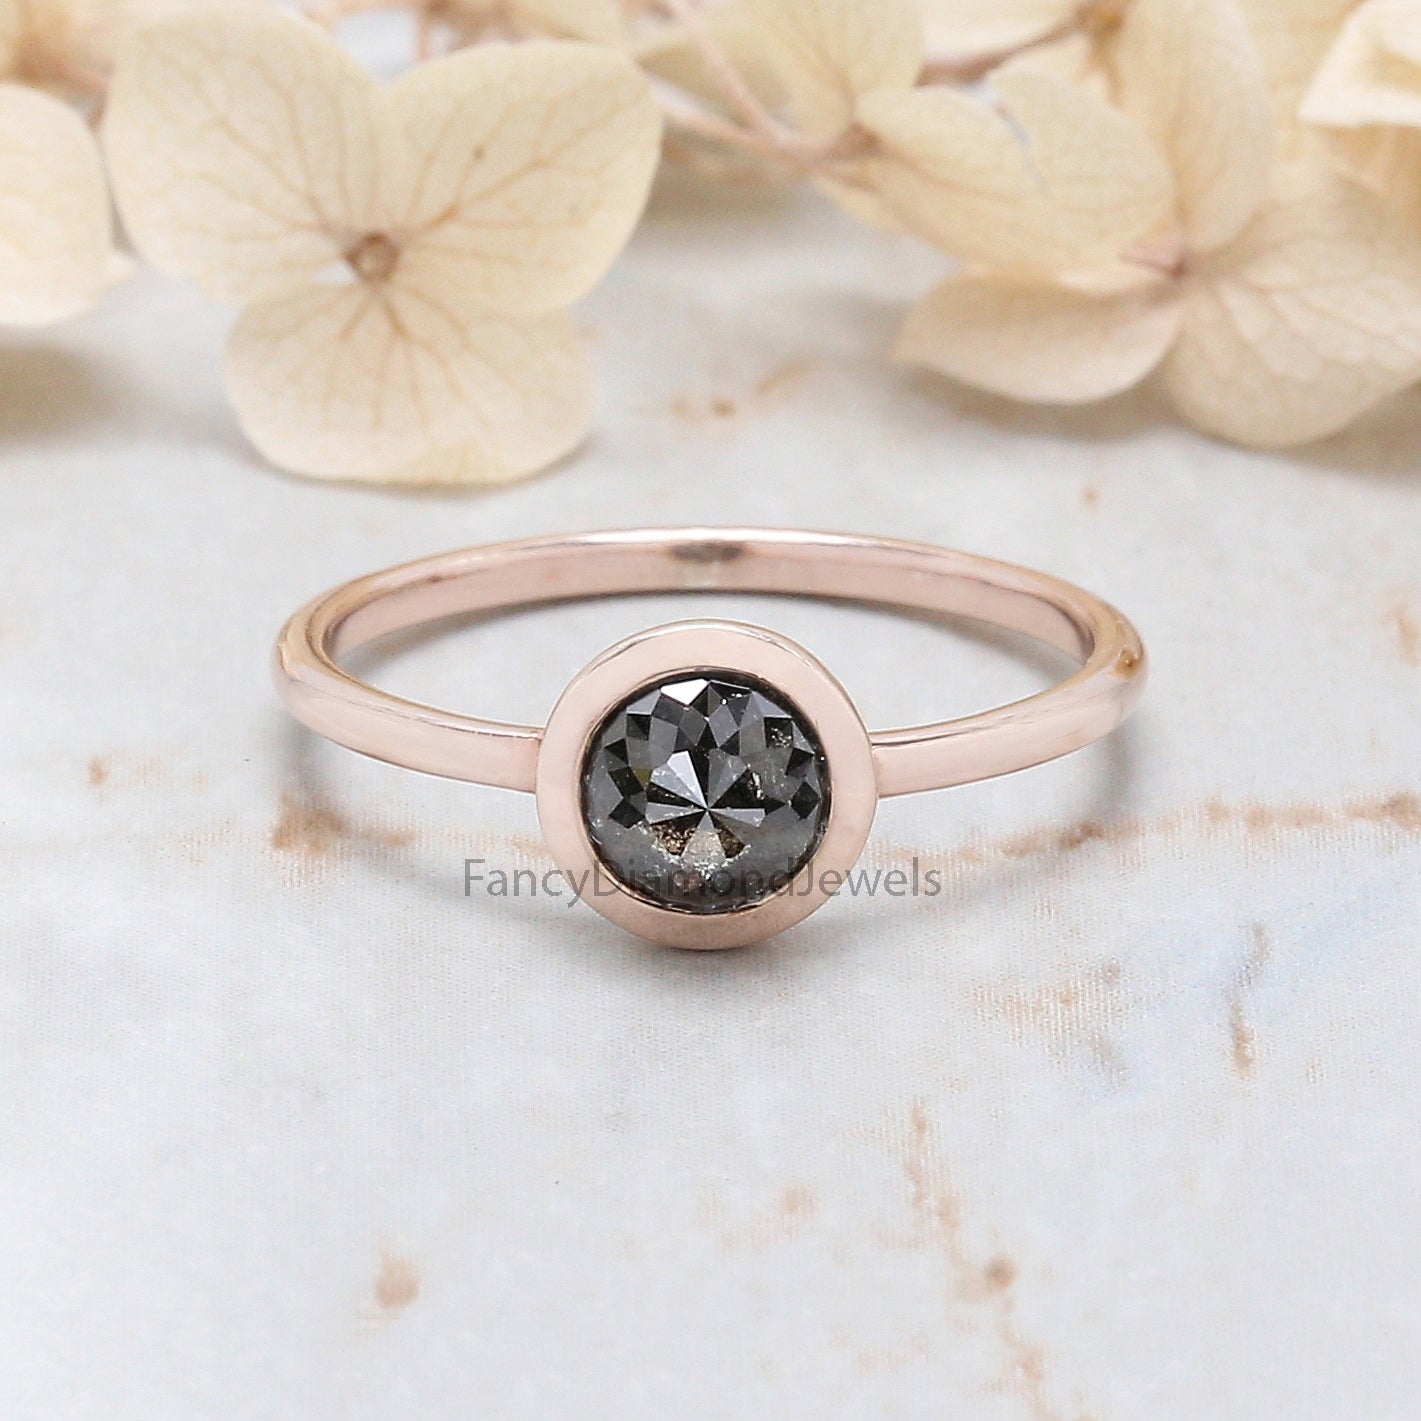 Round Rose Cut Salt And Pepper Diamond Ring 0.90 Ct 5.60 MM Round Shape Diamond Ring 14K Rose Gold Silver Engagement Ring Gift For Her QN8896